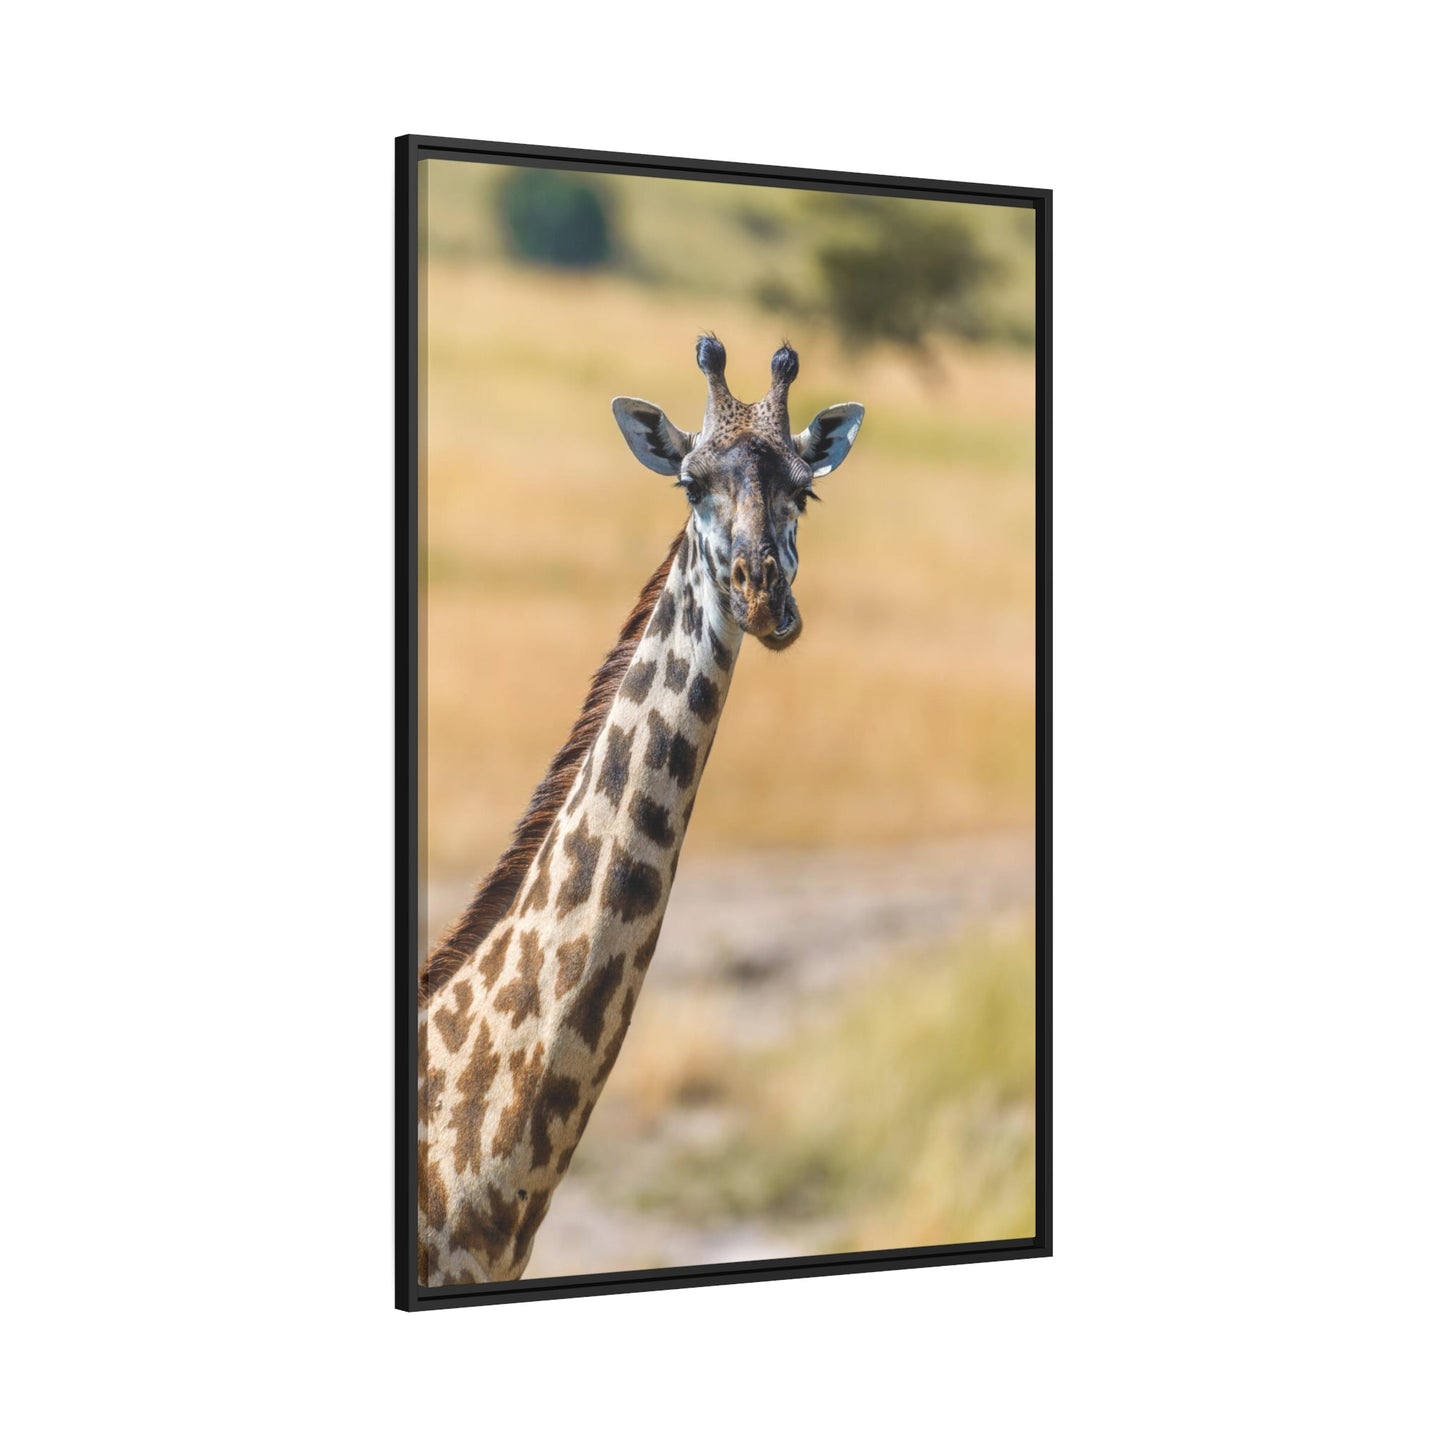 Wild and Free: Canvas Wall Art Featuring a Giraffe in the African Plains